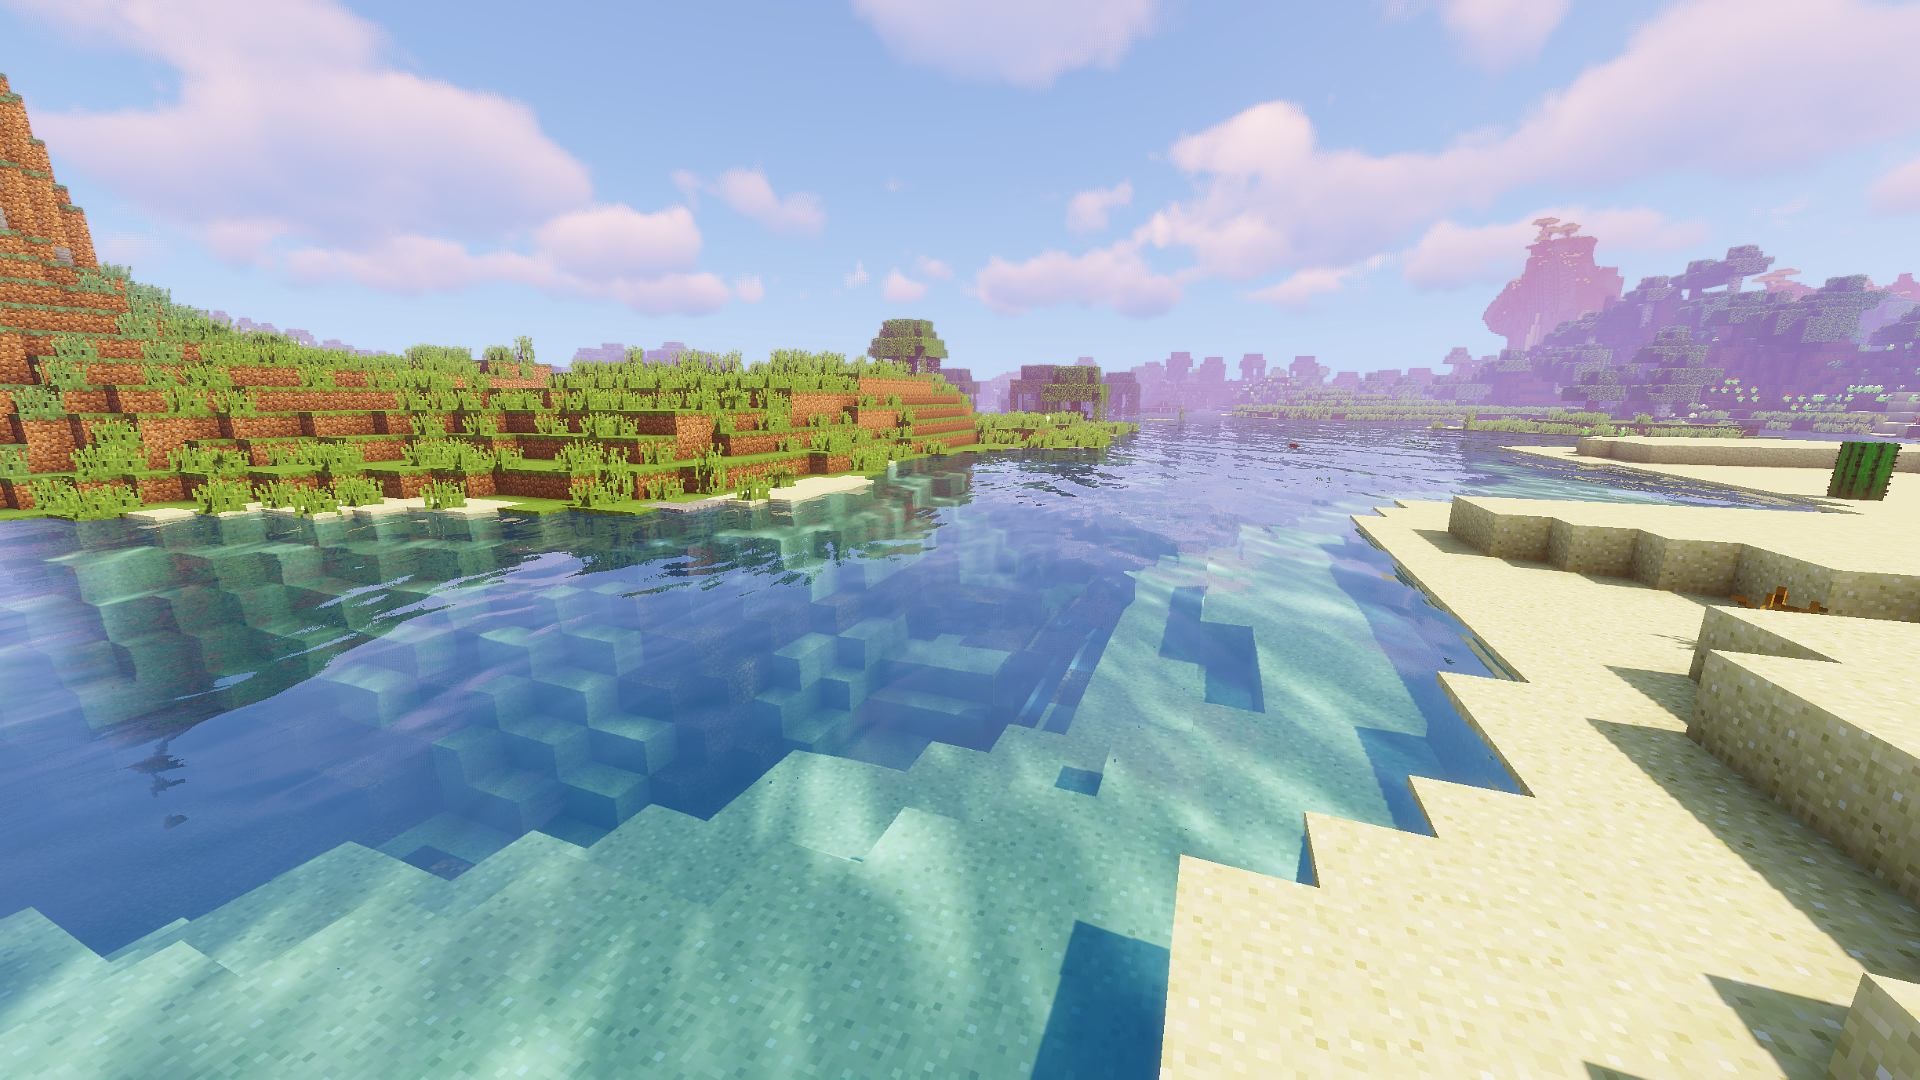 10 Best Minecraft 1.20 Shaders You Should Try